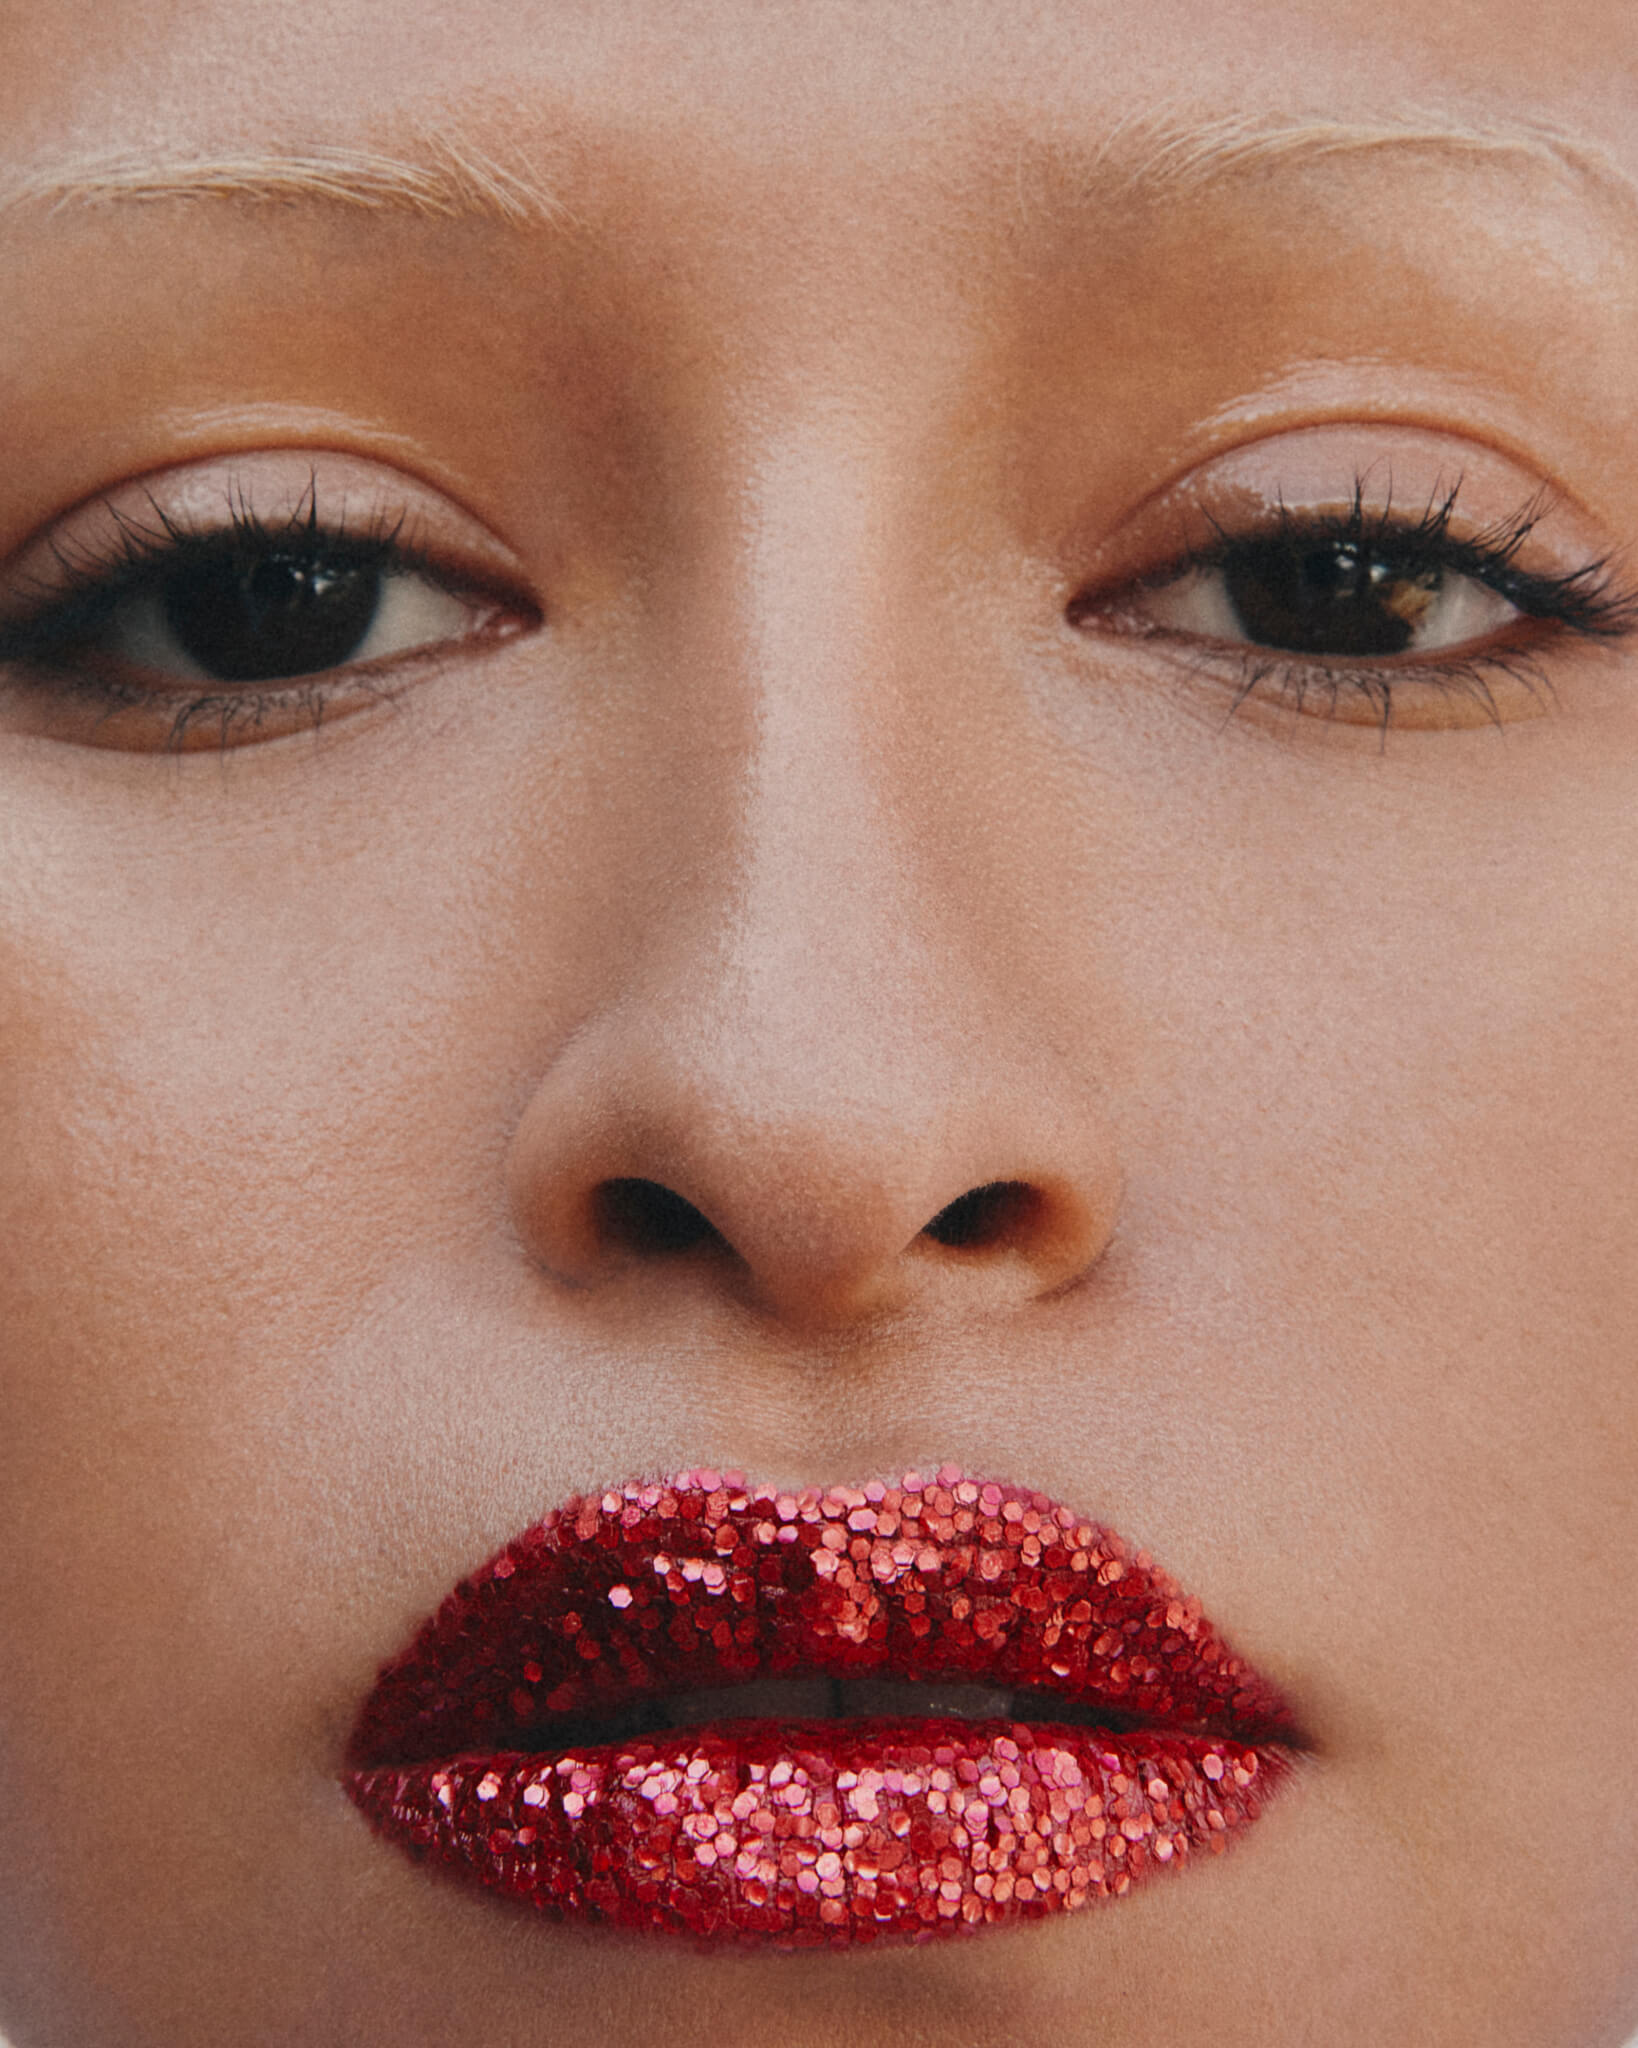 a cropped close-up of the face of a youthful female model with bleached eyebrows, medium complexion and neutral expression, with flakes of plastic-free red glitter coating her slightly parted lips